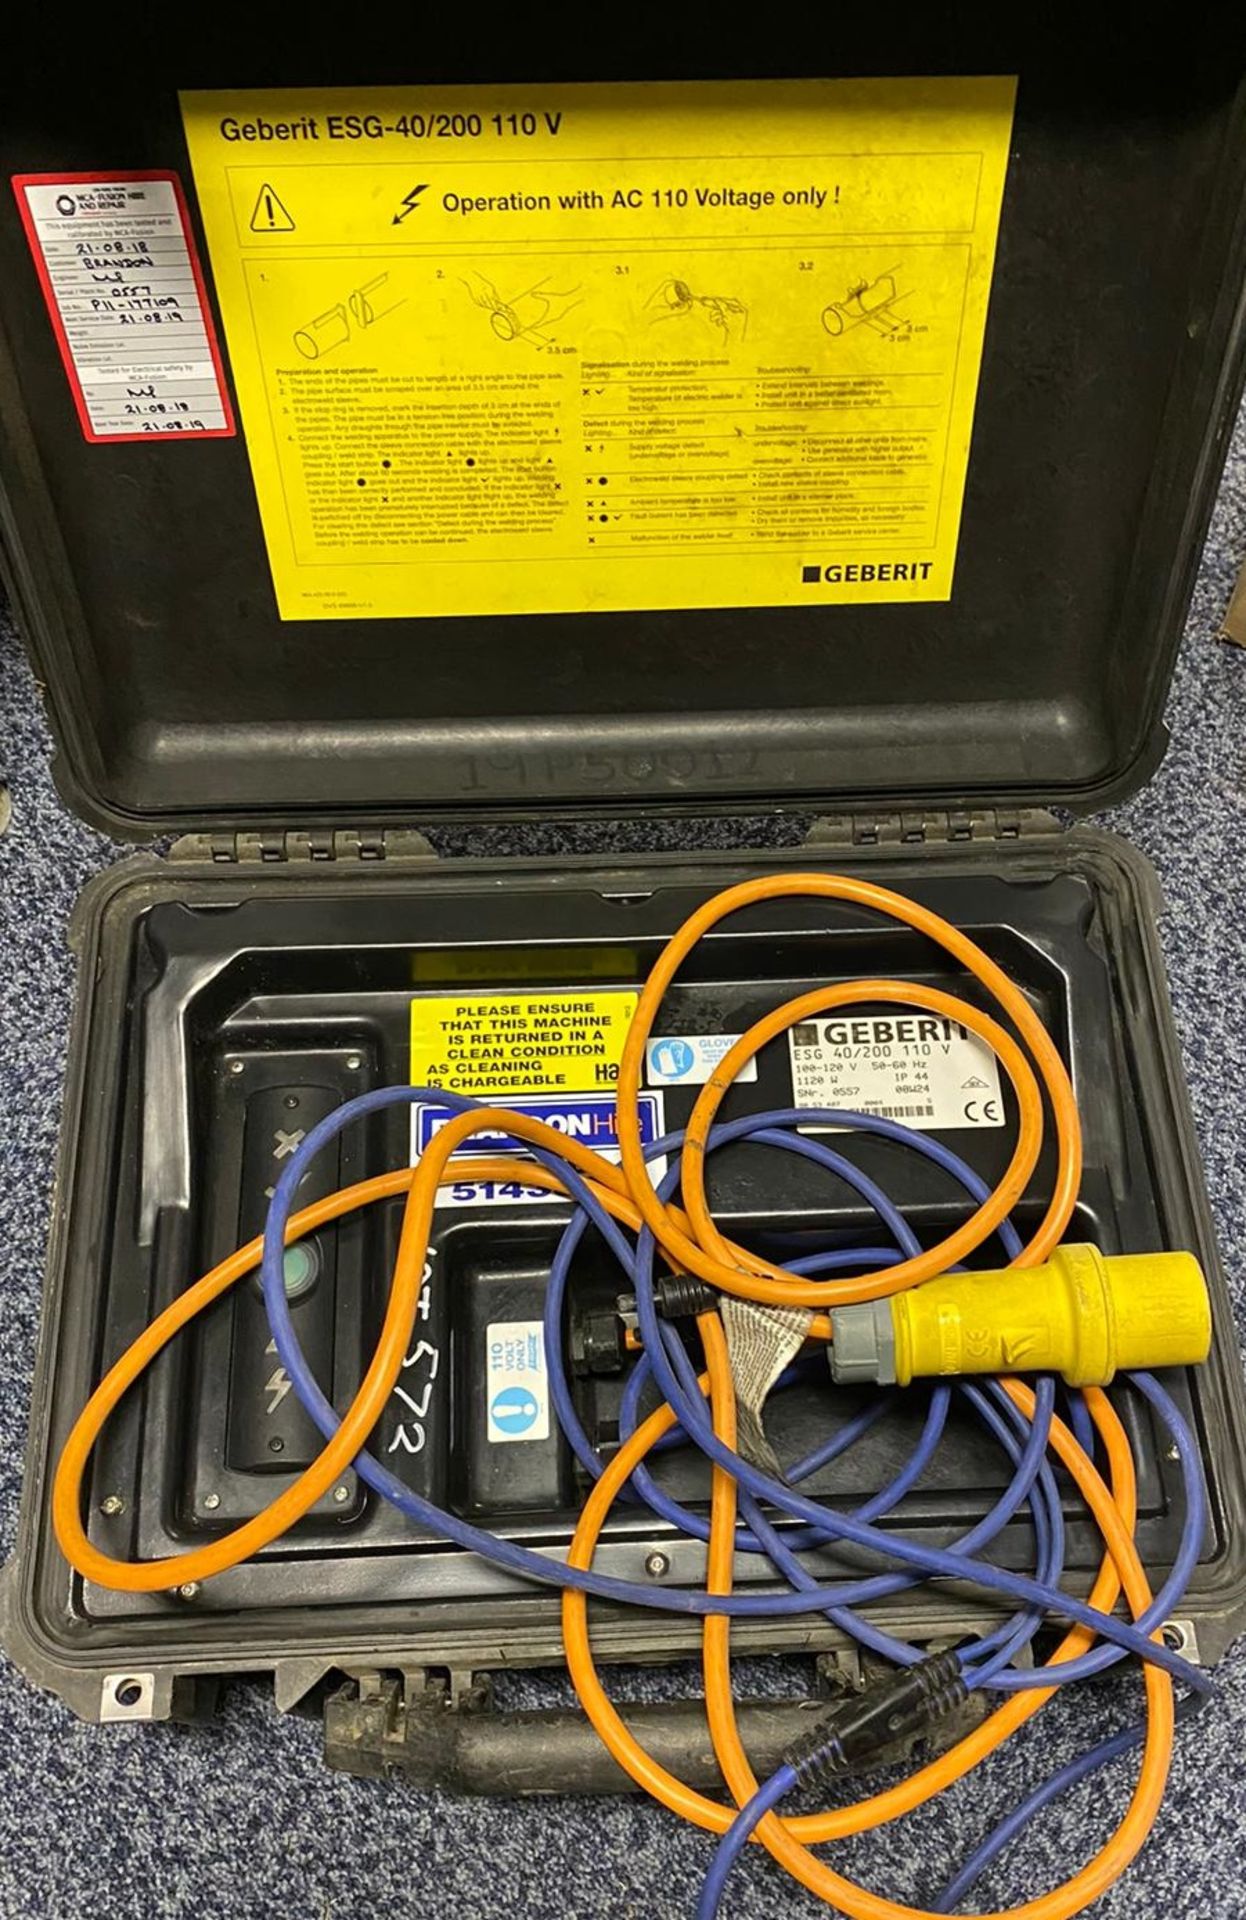 1 x Geberit Esg 40/200 110V Pipe Welding Kit - Used condition - CL011 - Location: Altrincham WA14 - Image 2 of 4